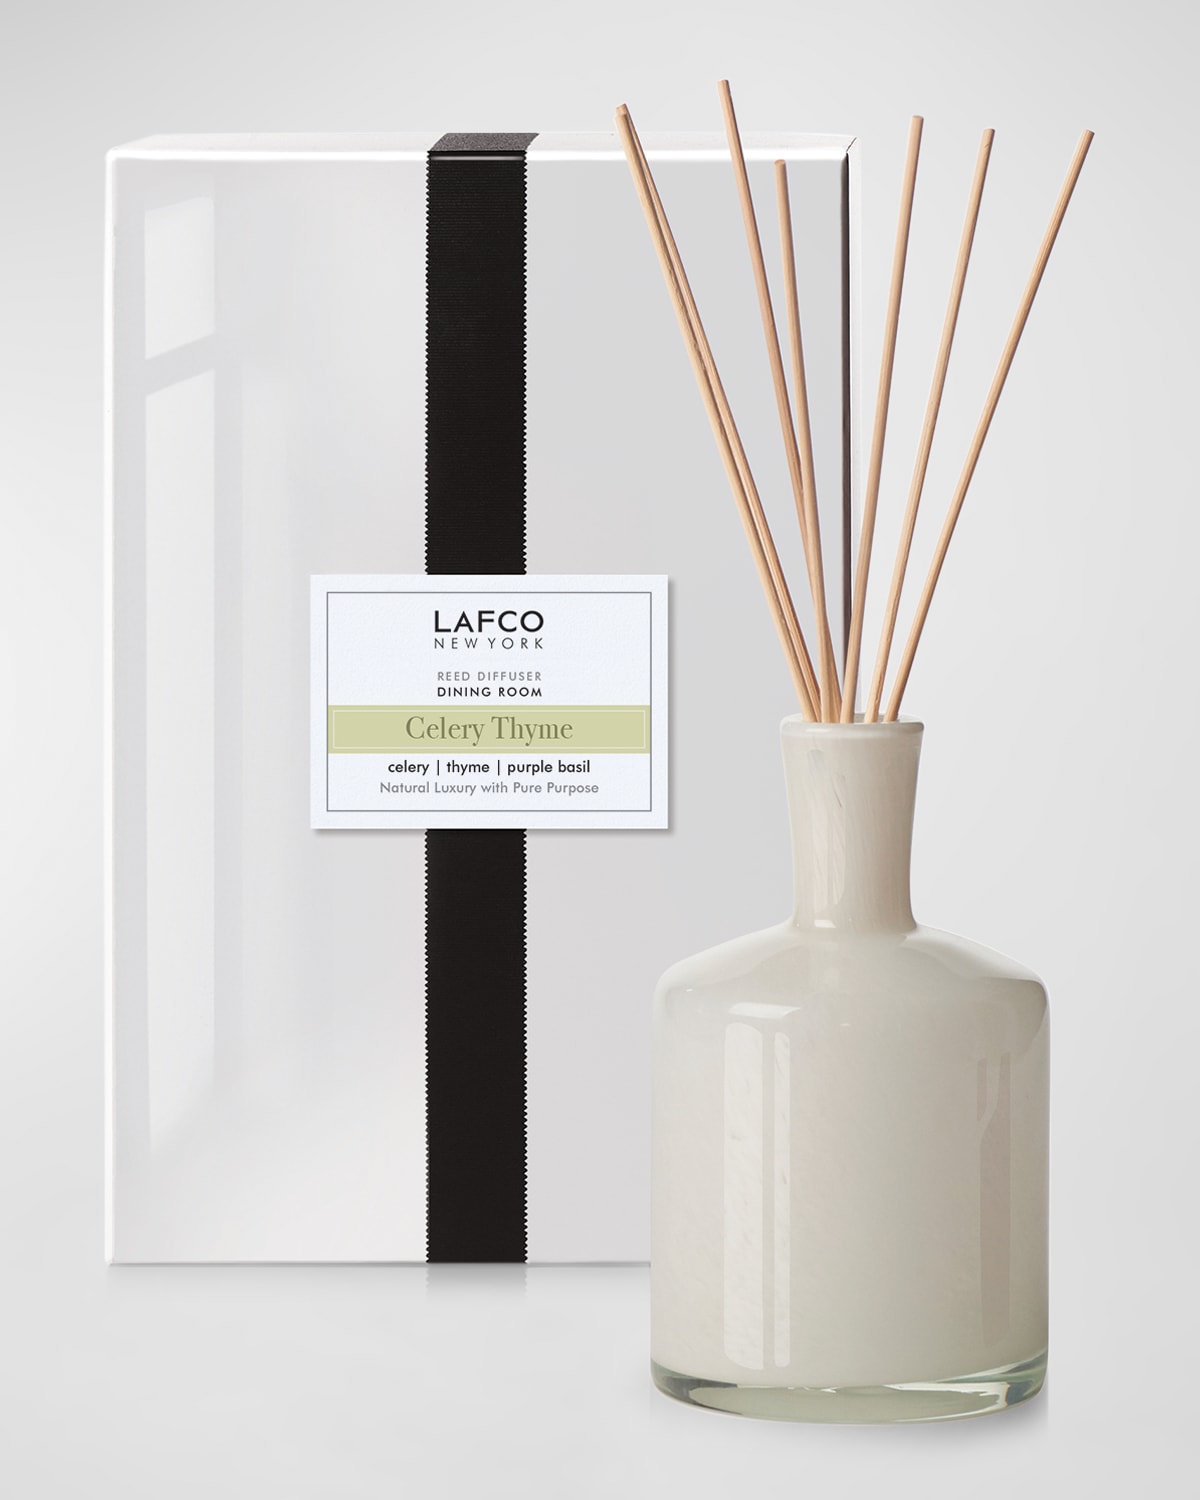 Celery Thyme Reed Diffuser &#150; Dining Room, 15 oz./ 443 mL